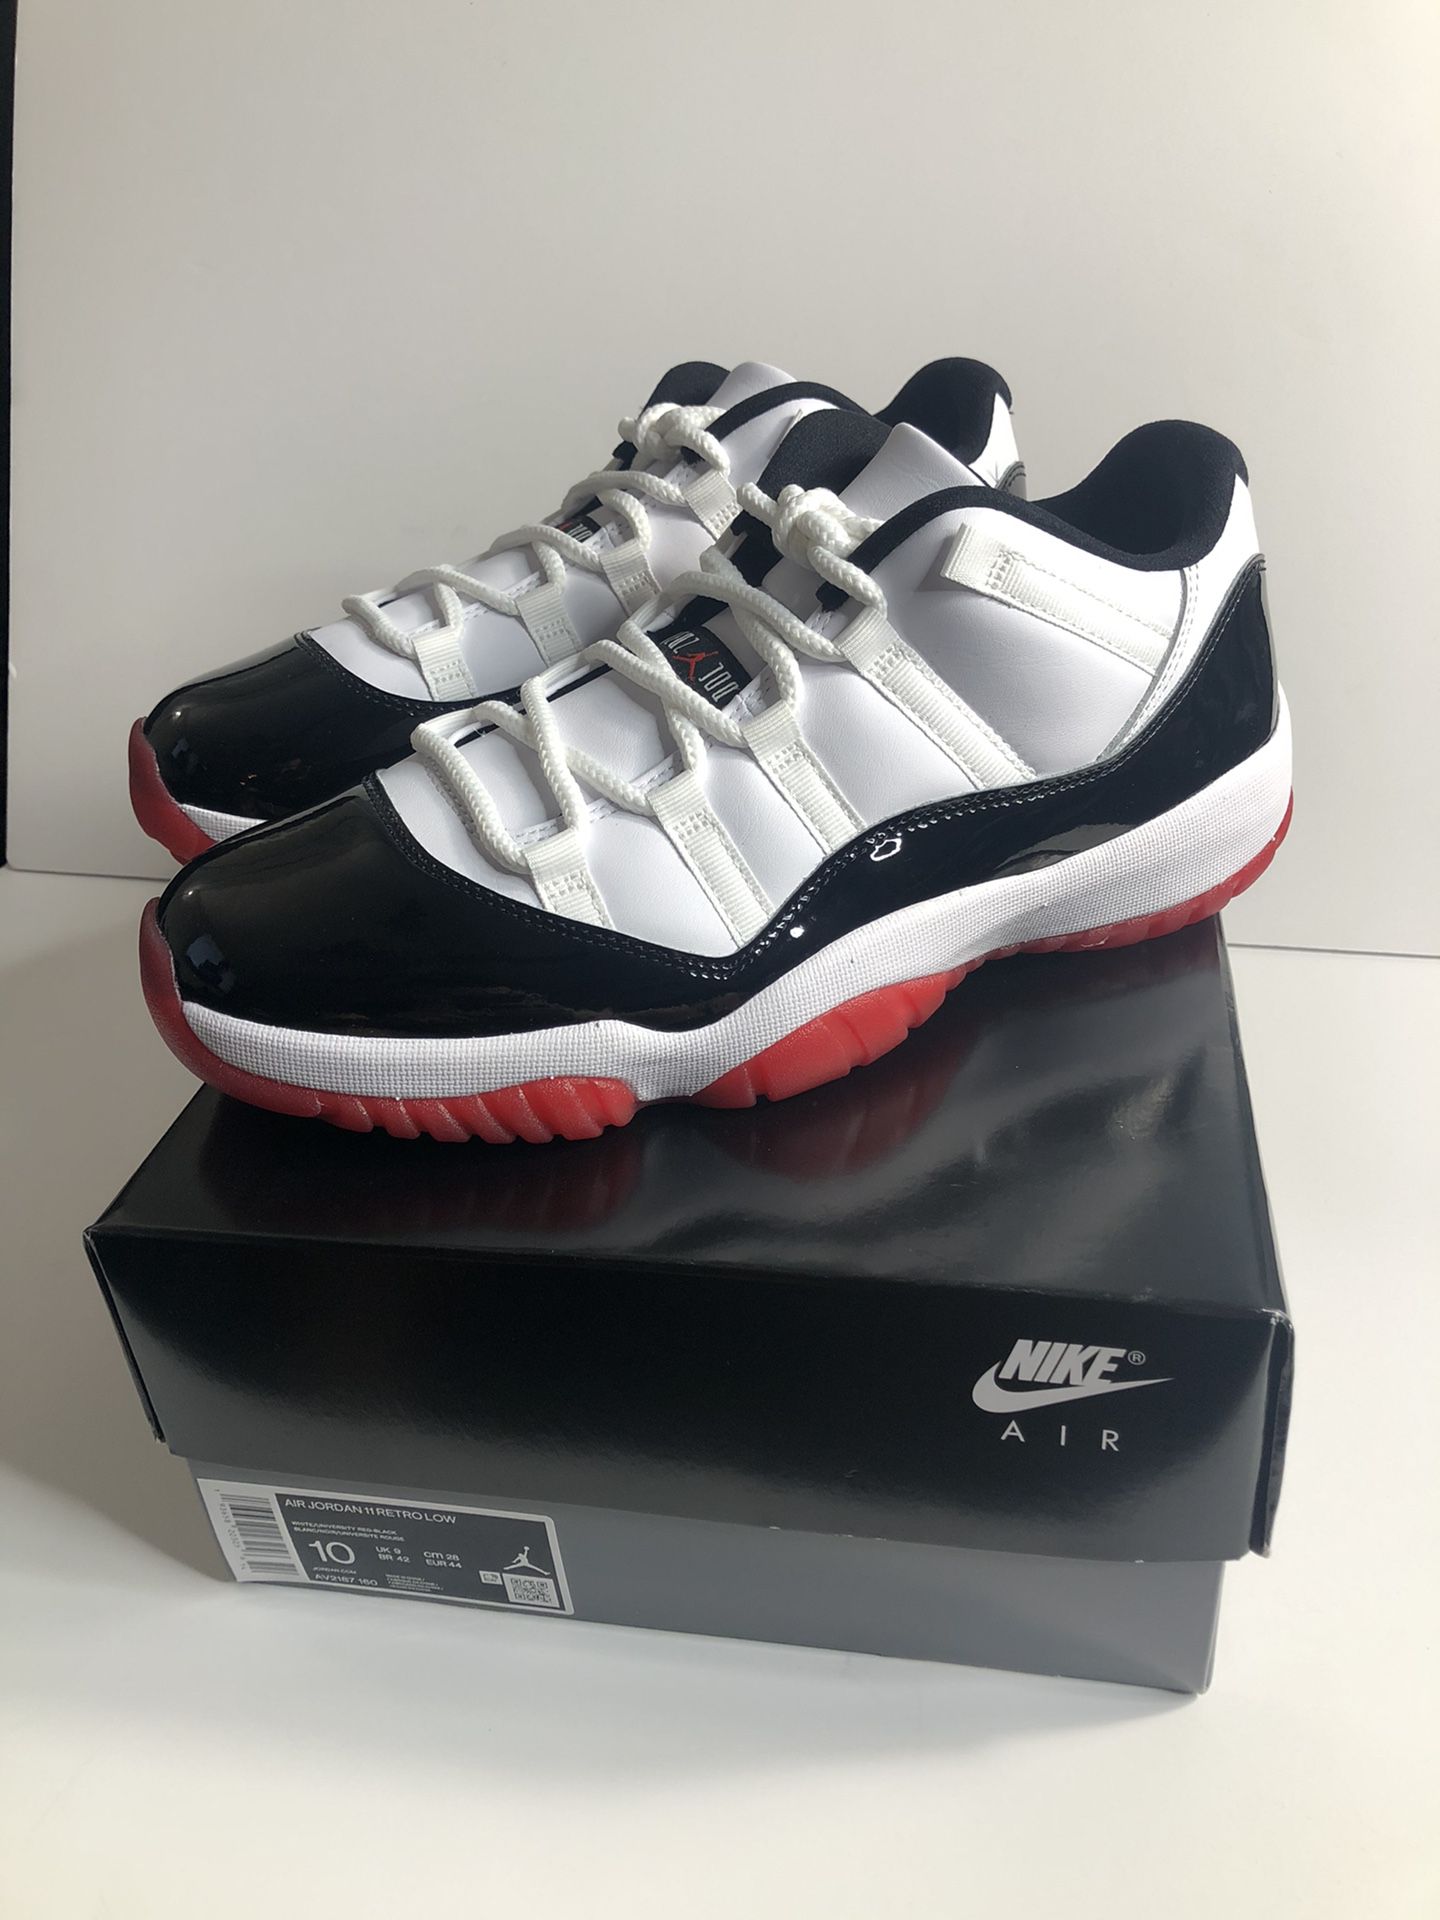 Nike air Jordan 11 low concord bred early release size 10 brand new